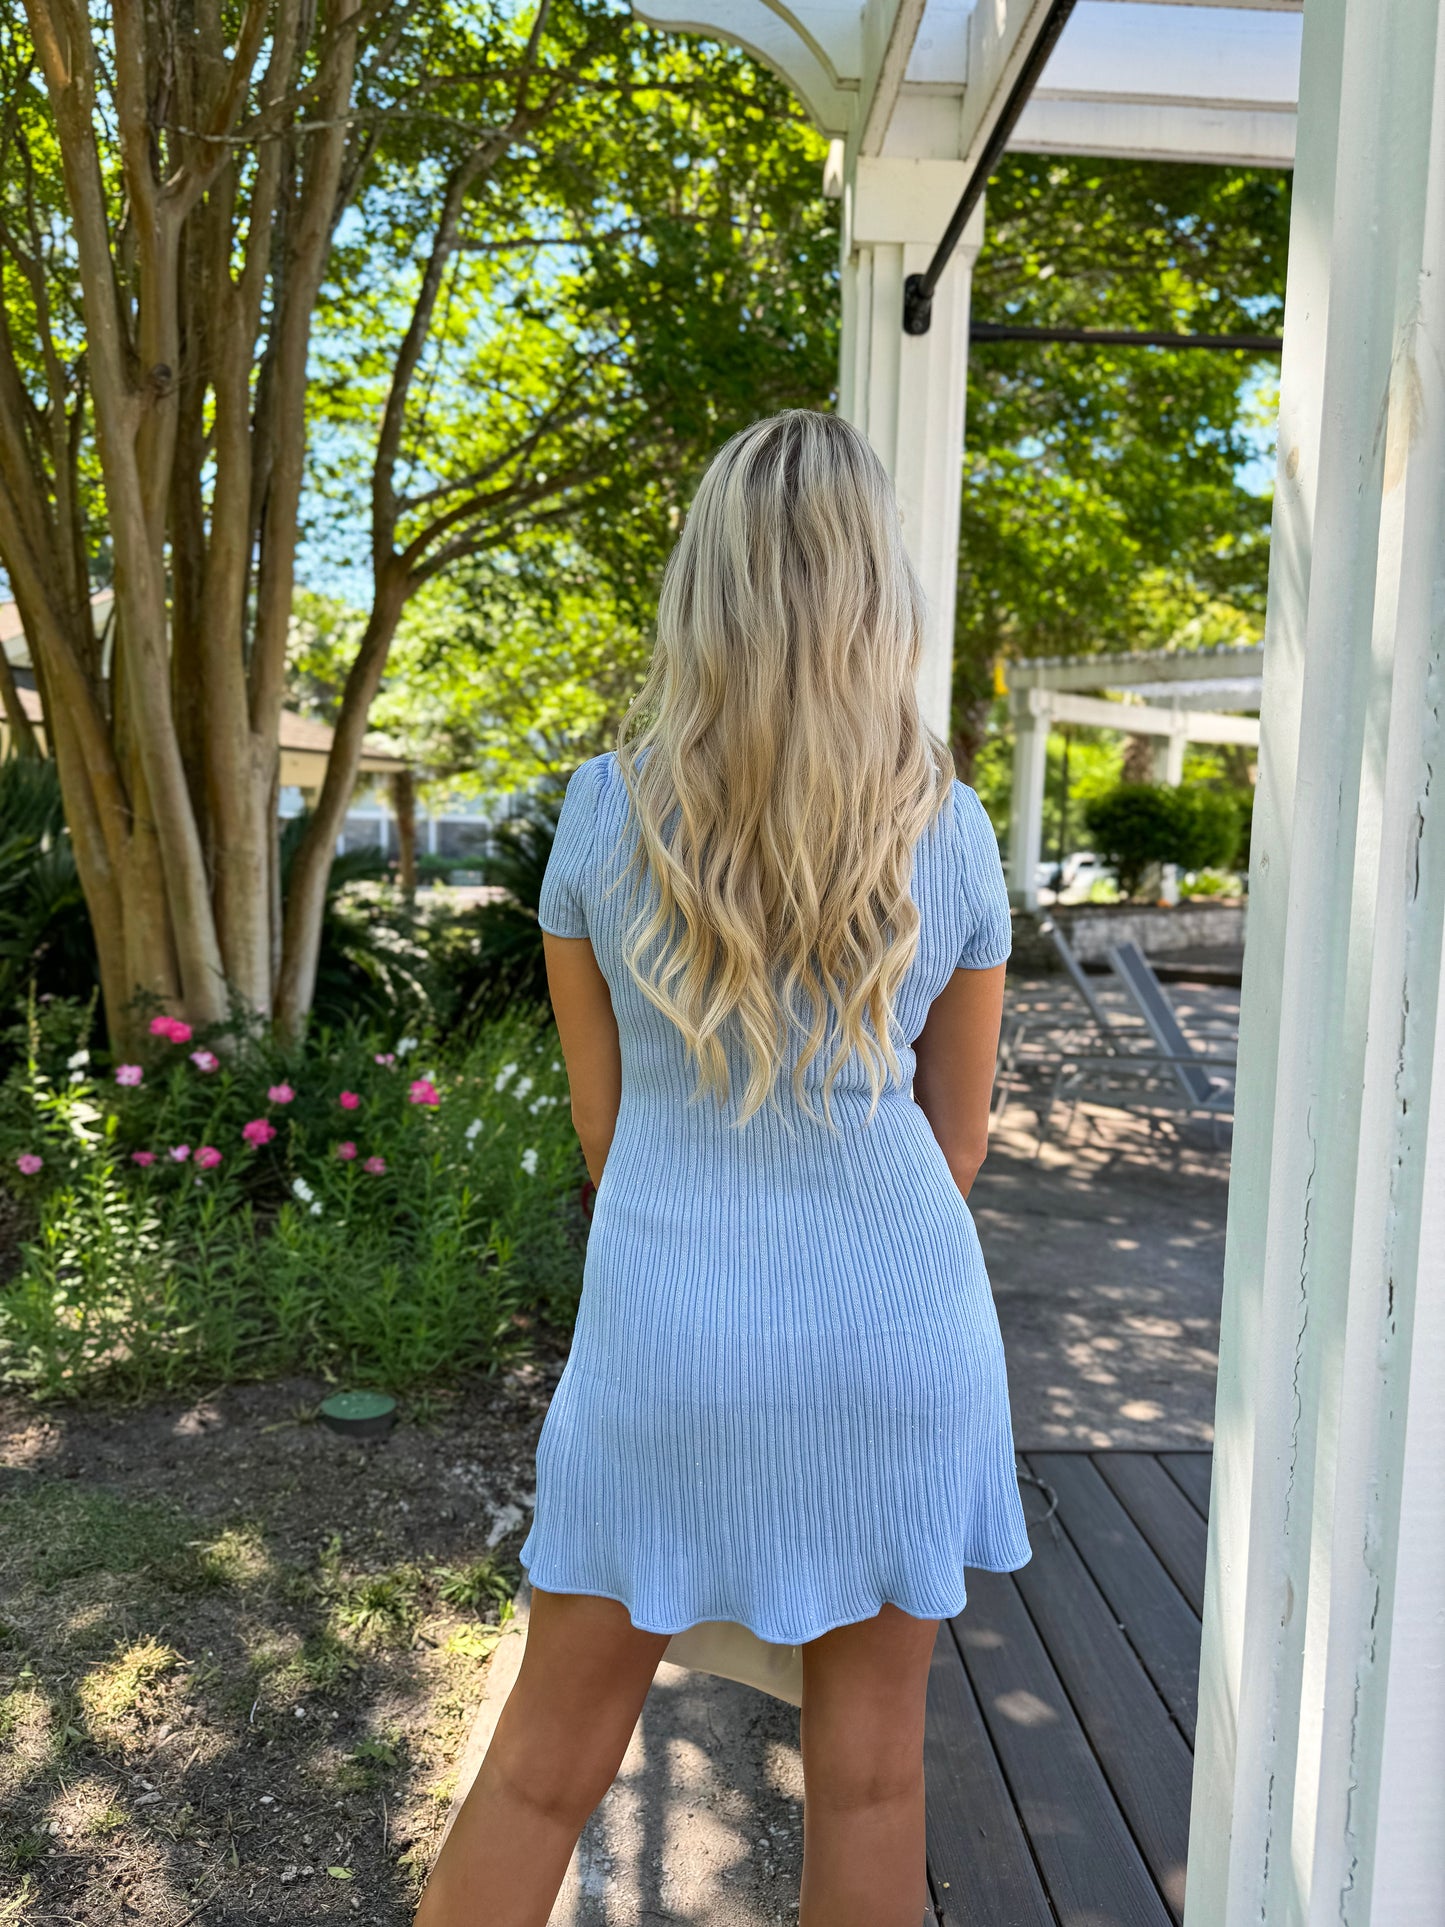 Sipping’ Prosecco Periwinkle Dress